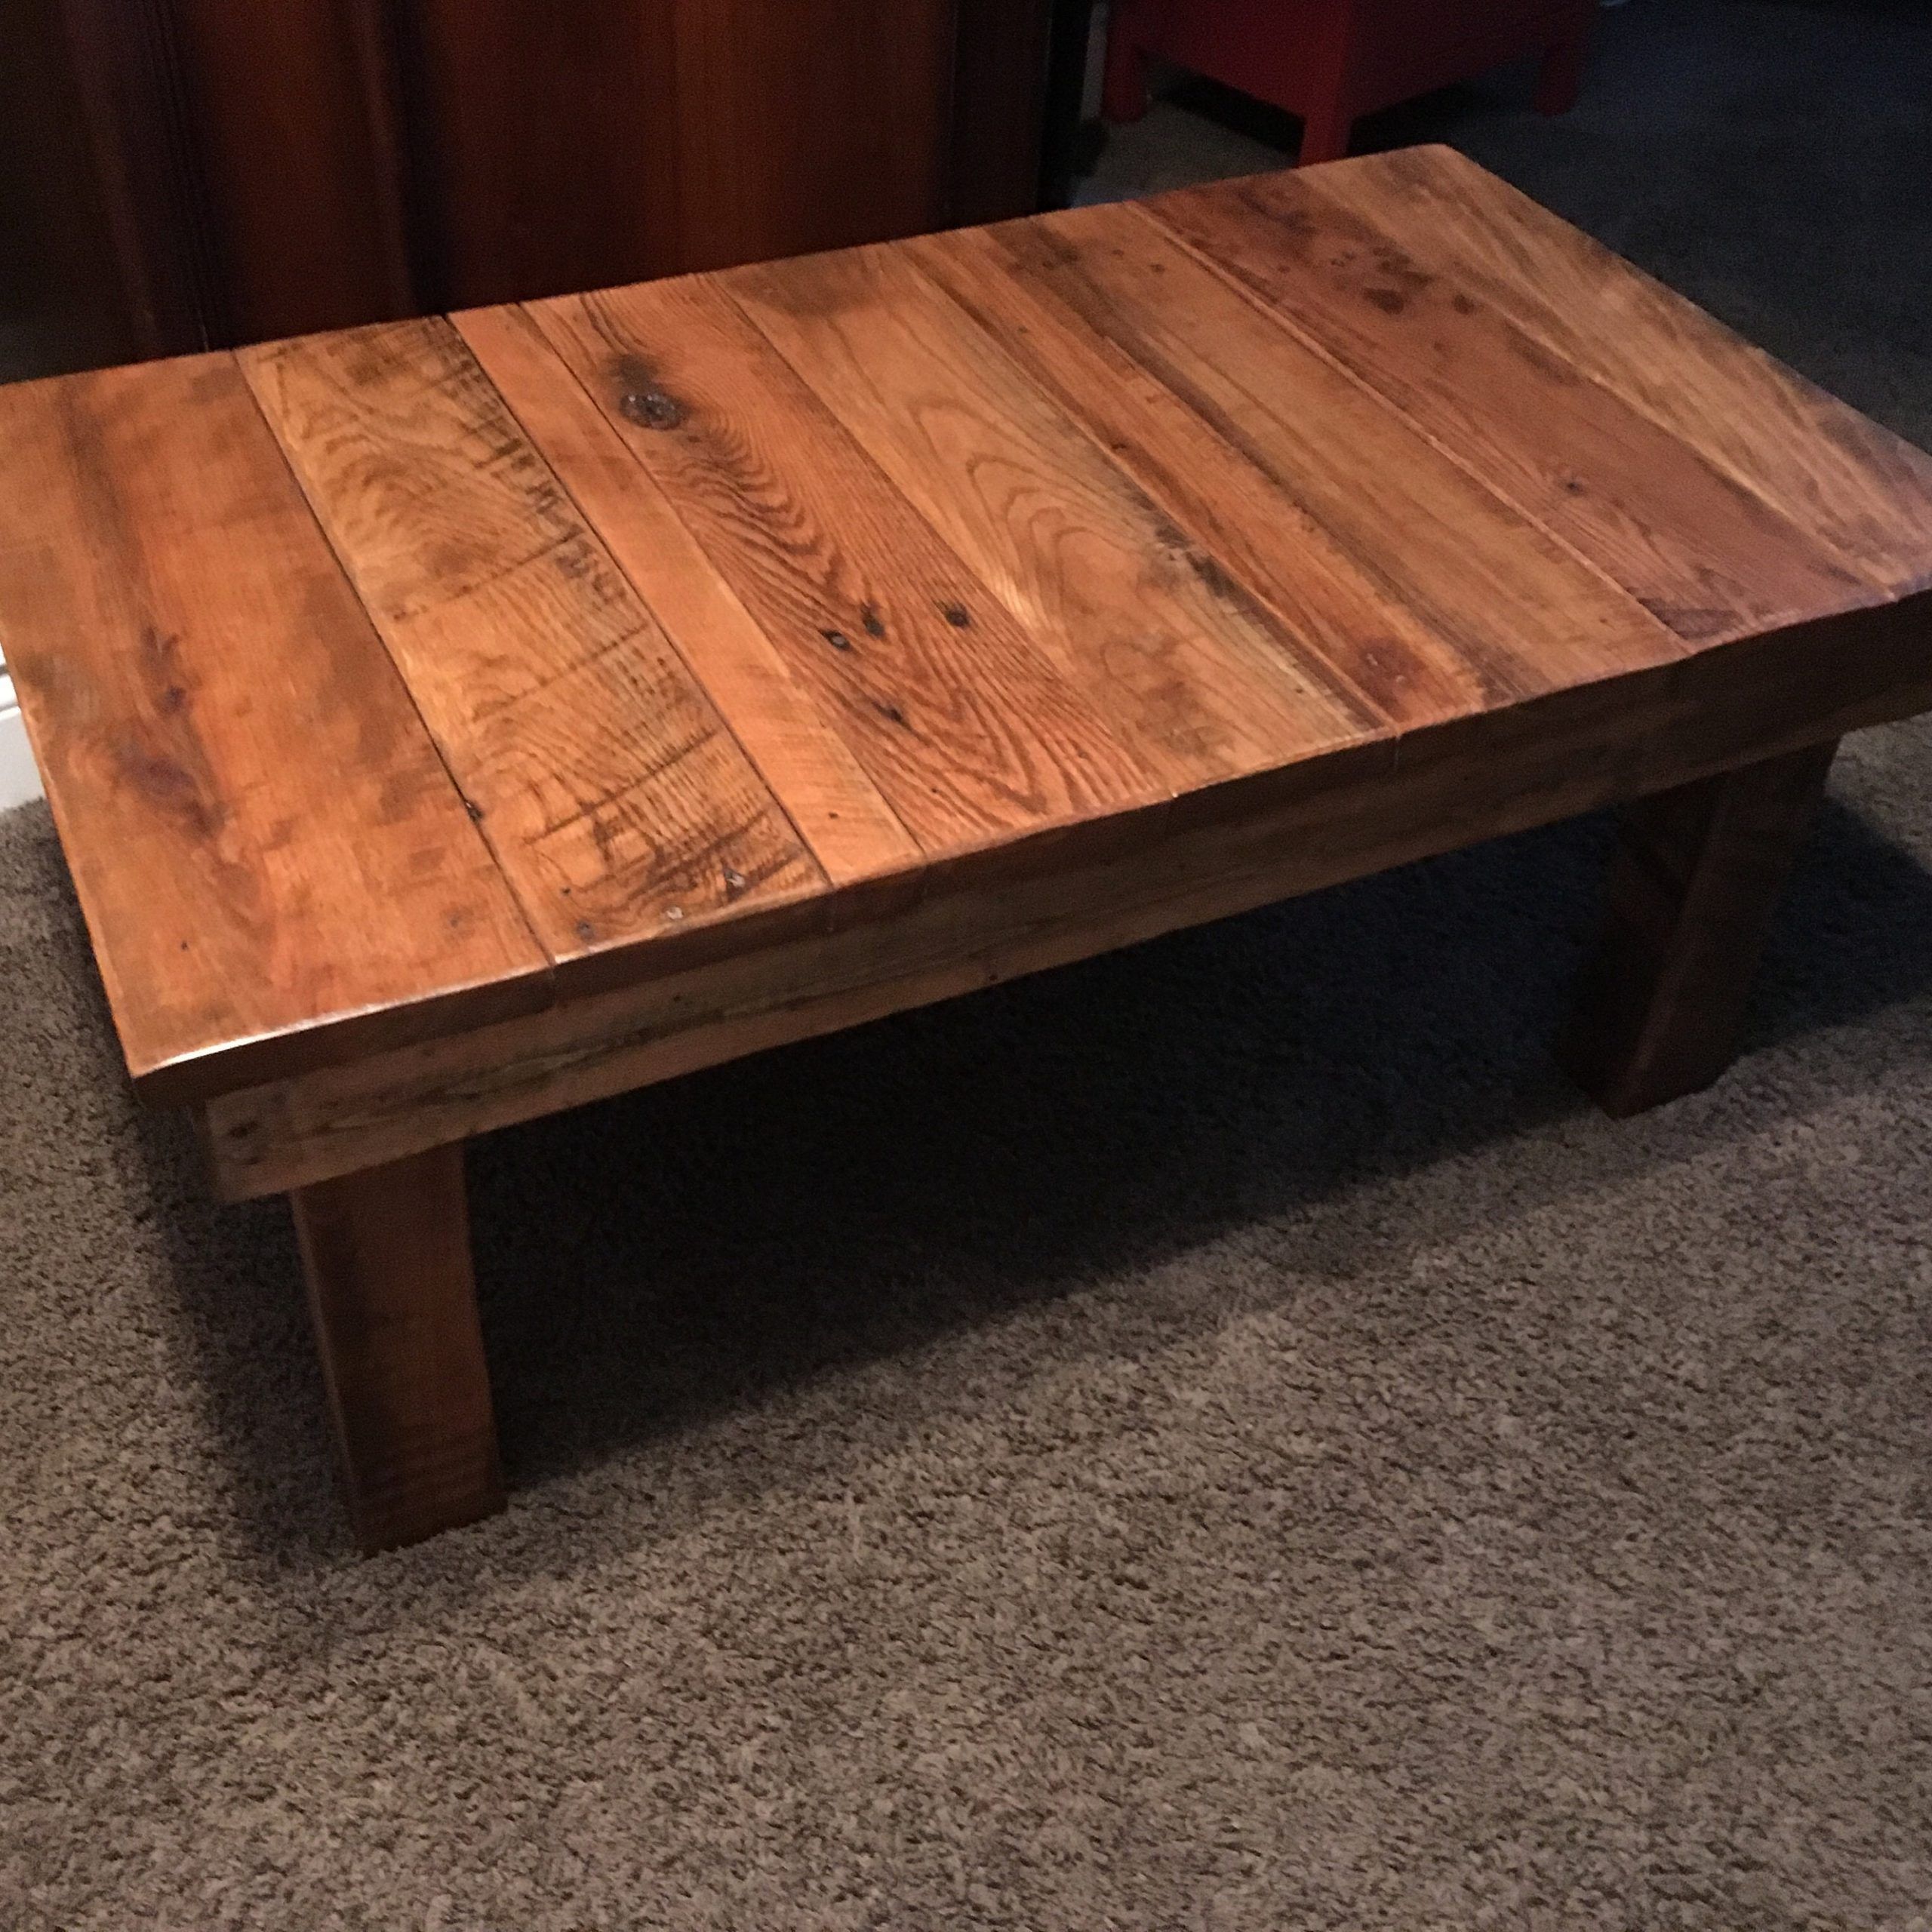 Reclaimed Wood Coffee Tables For Most Recently Released Reclaimed Wood Rustic Coffee Table (View 11 of 20)